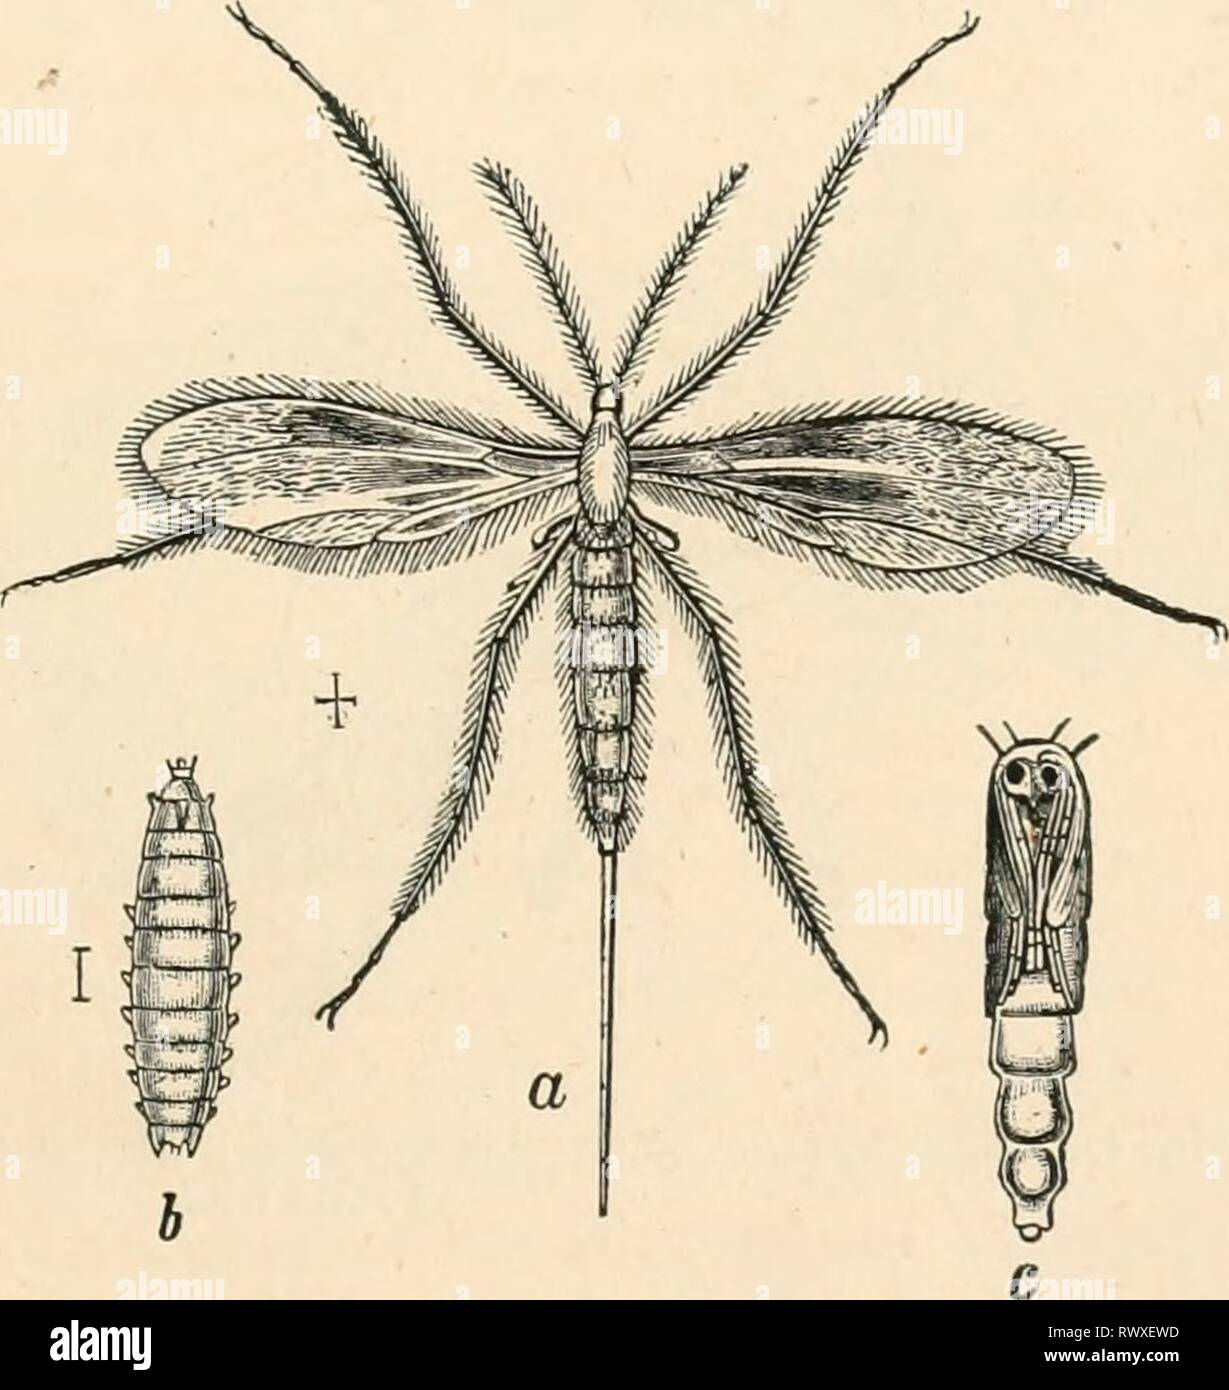 Elementary text-book of zoology (1884) Elementary text-book of zoology elementarytextbo0101clau Year: 1884  DIPTERA. 577 the knife-shaped mandibles arc wanting. Their puncture is severe, ami they suck blood. C/i'&gt;'t/x(&gt;j)x i-it'i-iiticns L., Tal/ainis Imcin-us L. (Kinderbrcmse). Heematopota /ilui'talis L. (Hegenbremse). Fam. Leptidae (Schnepfenfliegen). Lt-jrtix xeolopacca L.. L. /•/ r//i!/i'/i L., South Europe. The larva digs holes in the sand, and there, like the Ant-lion, captures insects. Fam. Xylophagidae (Holzfliegen). Xylophai/us ineii'idtfti/n Fabr. The larva- live in beech wood. Stock Photo